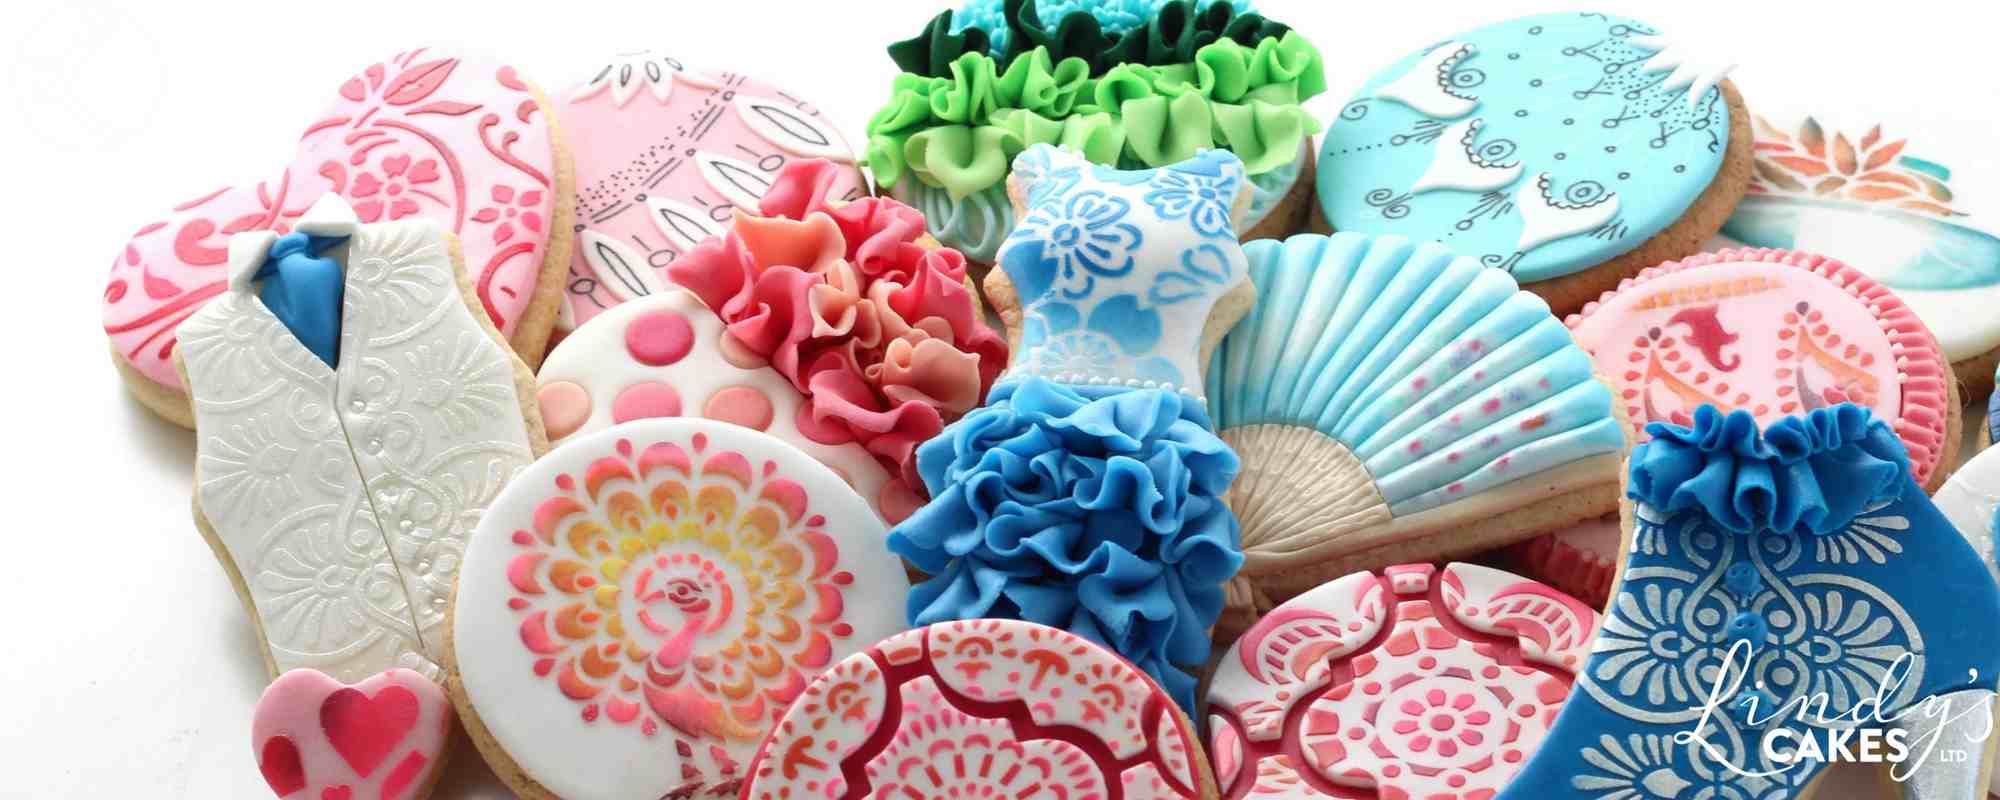 Be inspired by Lindy's decorated cookies